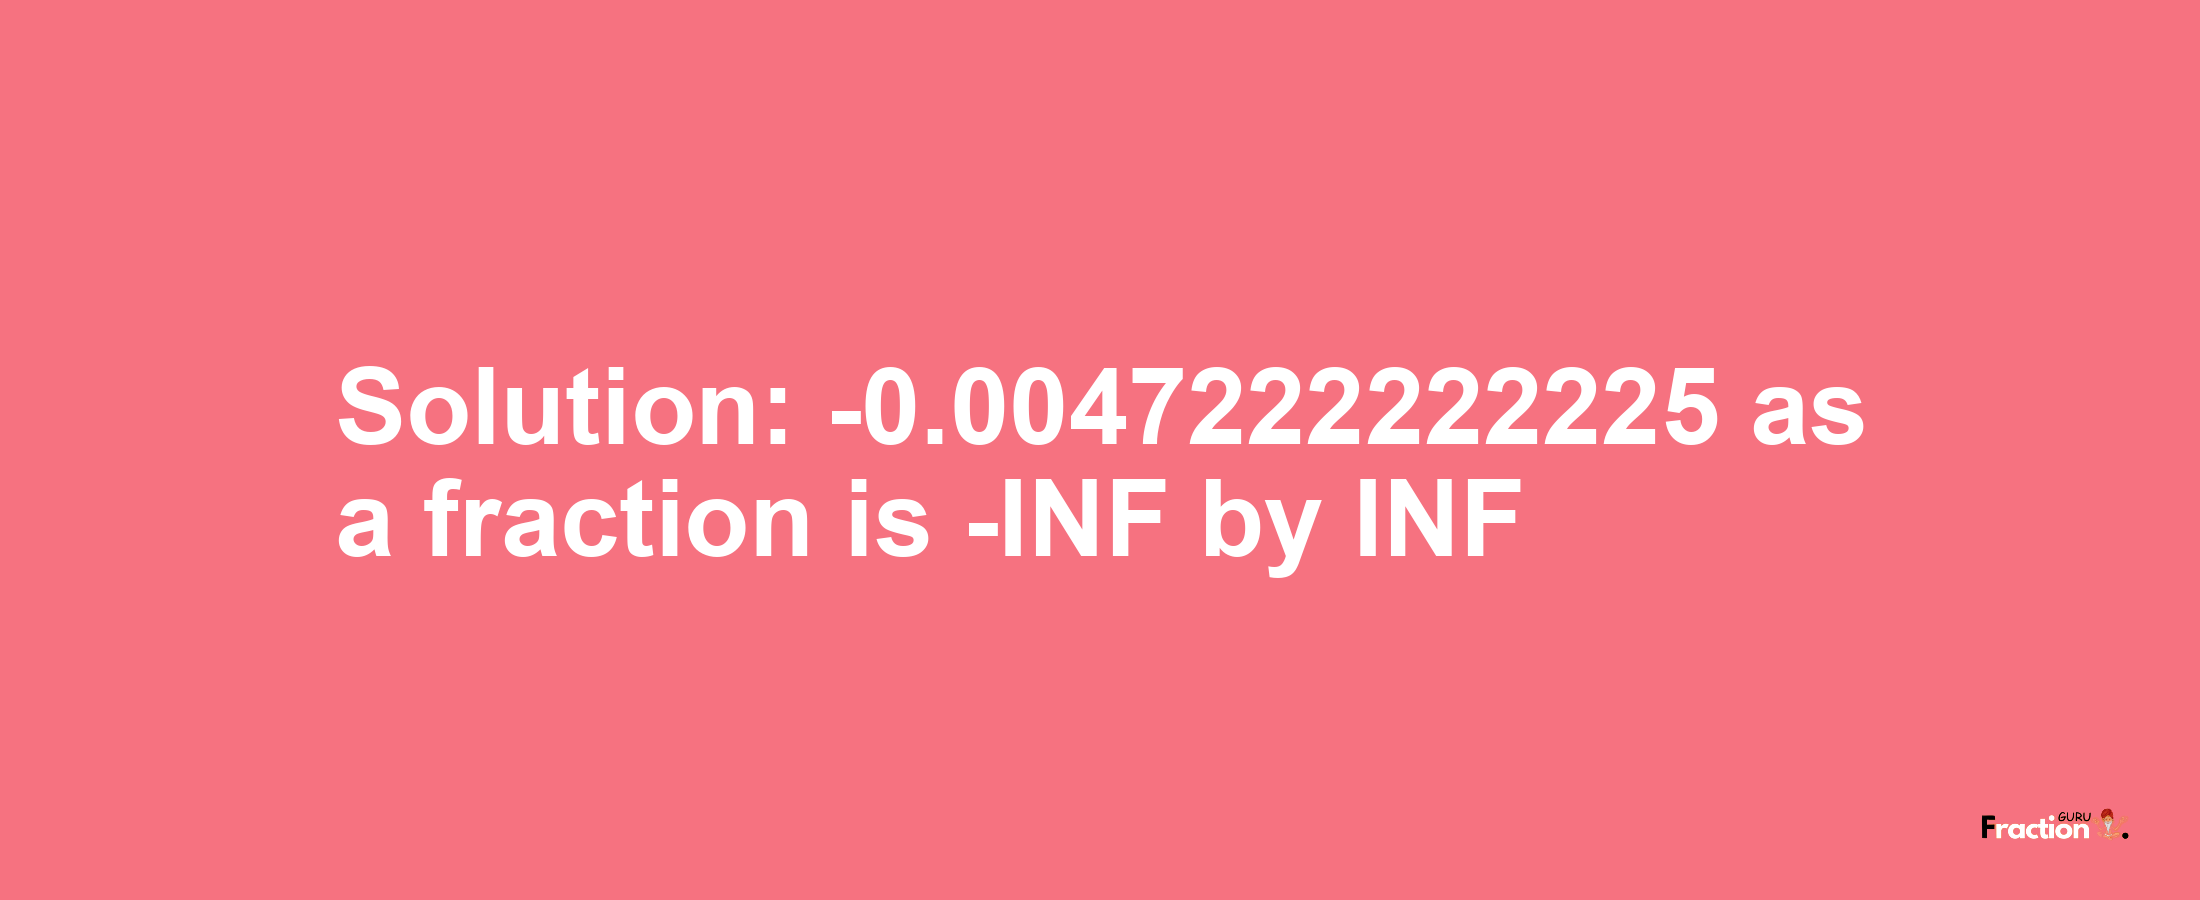 Solution:-0.0047222222225 as a fraction is -INF/INF